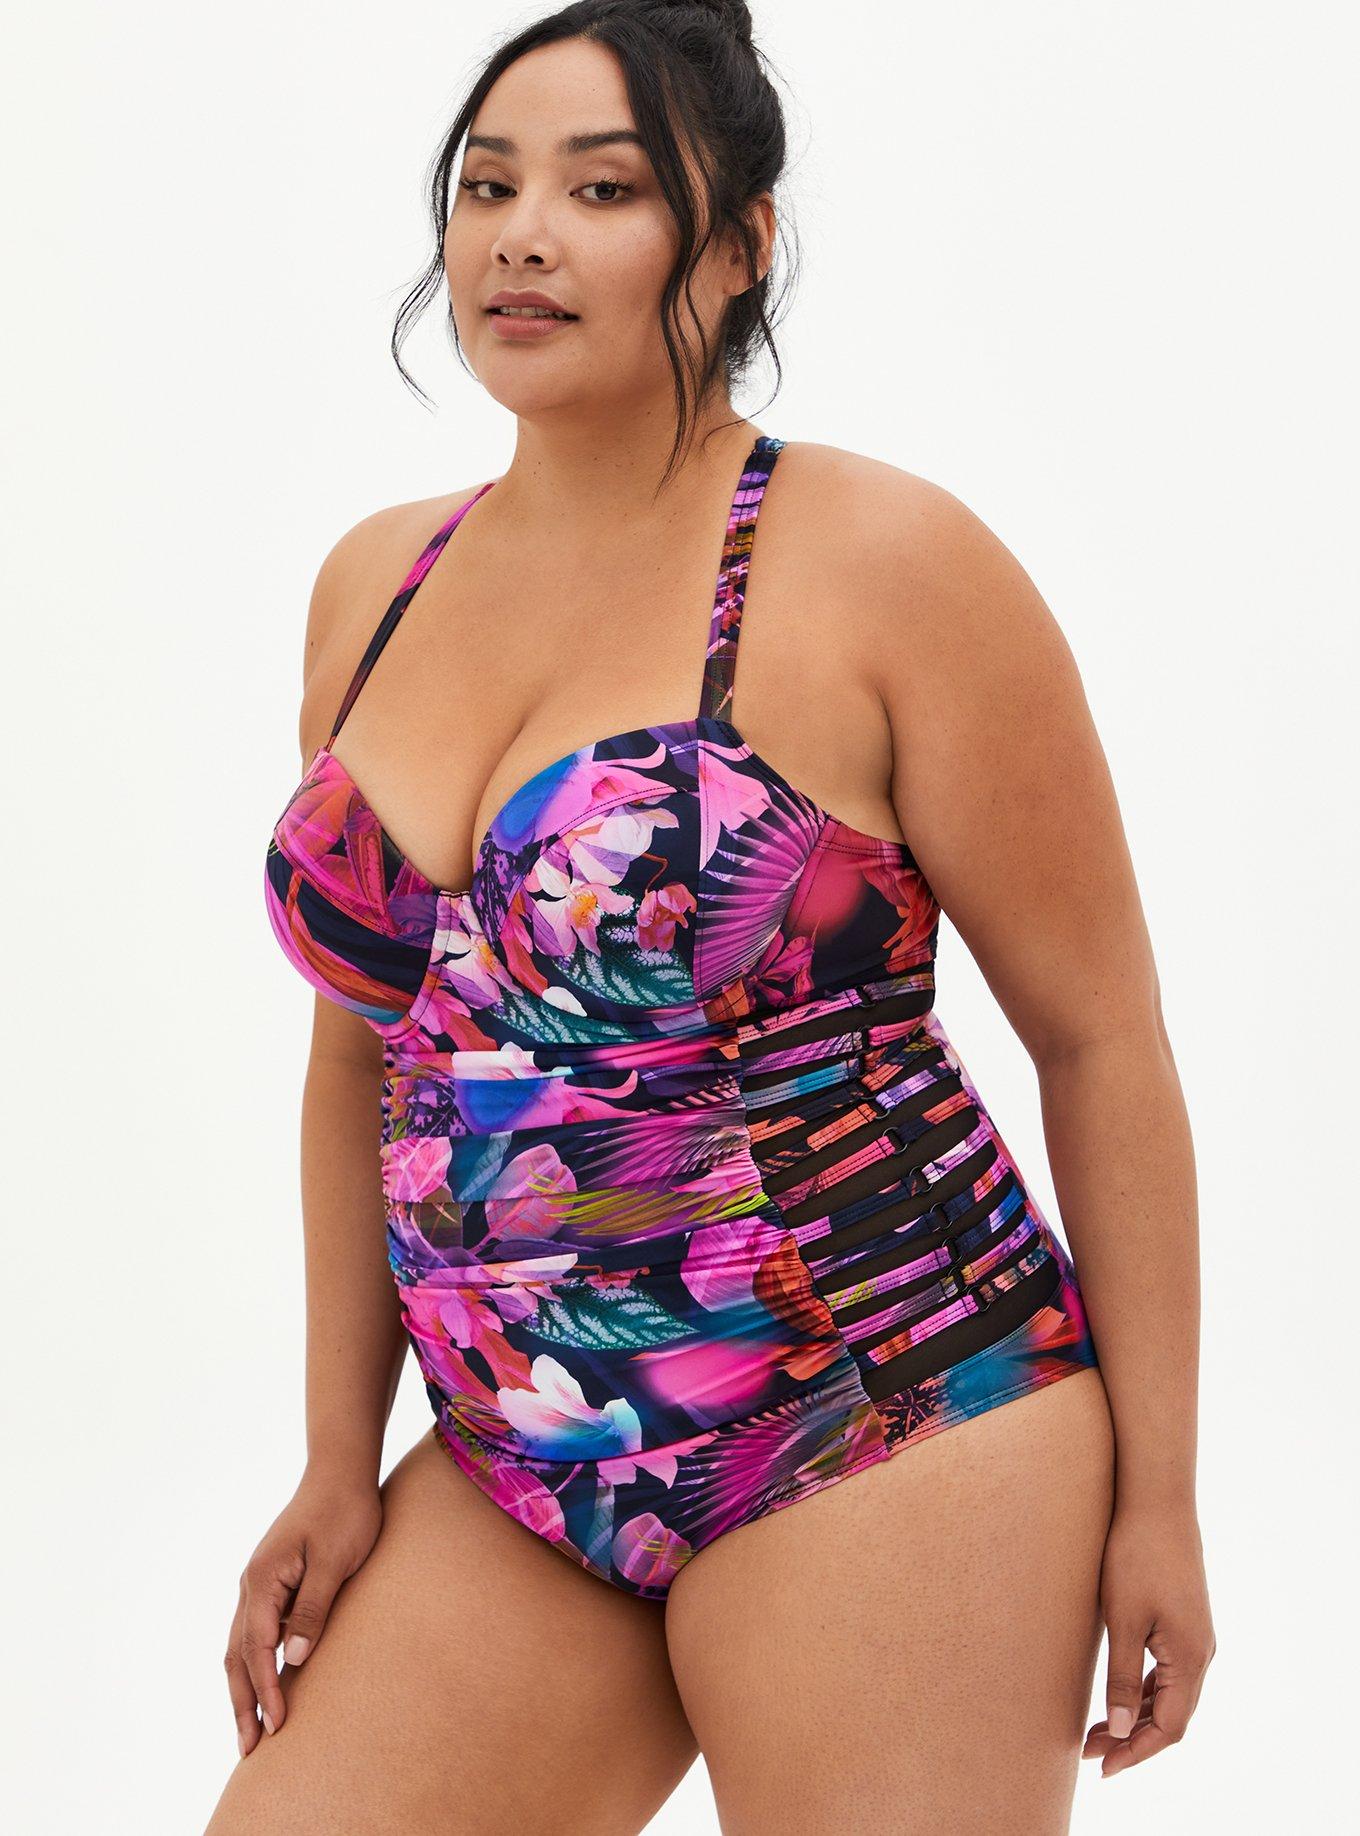 Simply Fit Women's Plus Size Swimdress, Knot Front, Adjustable Straps, D/DD Cup, Tummy Control